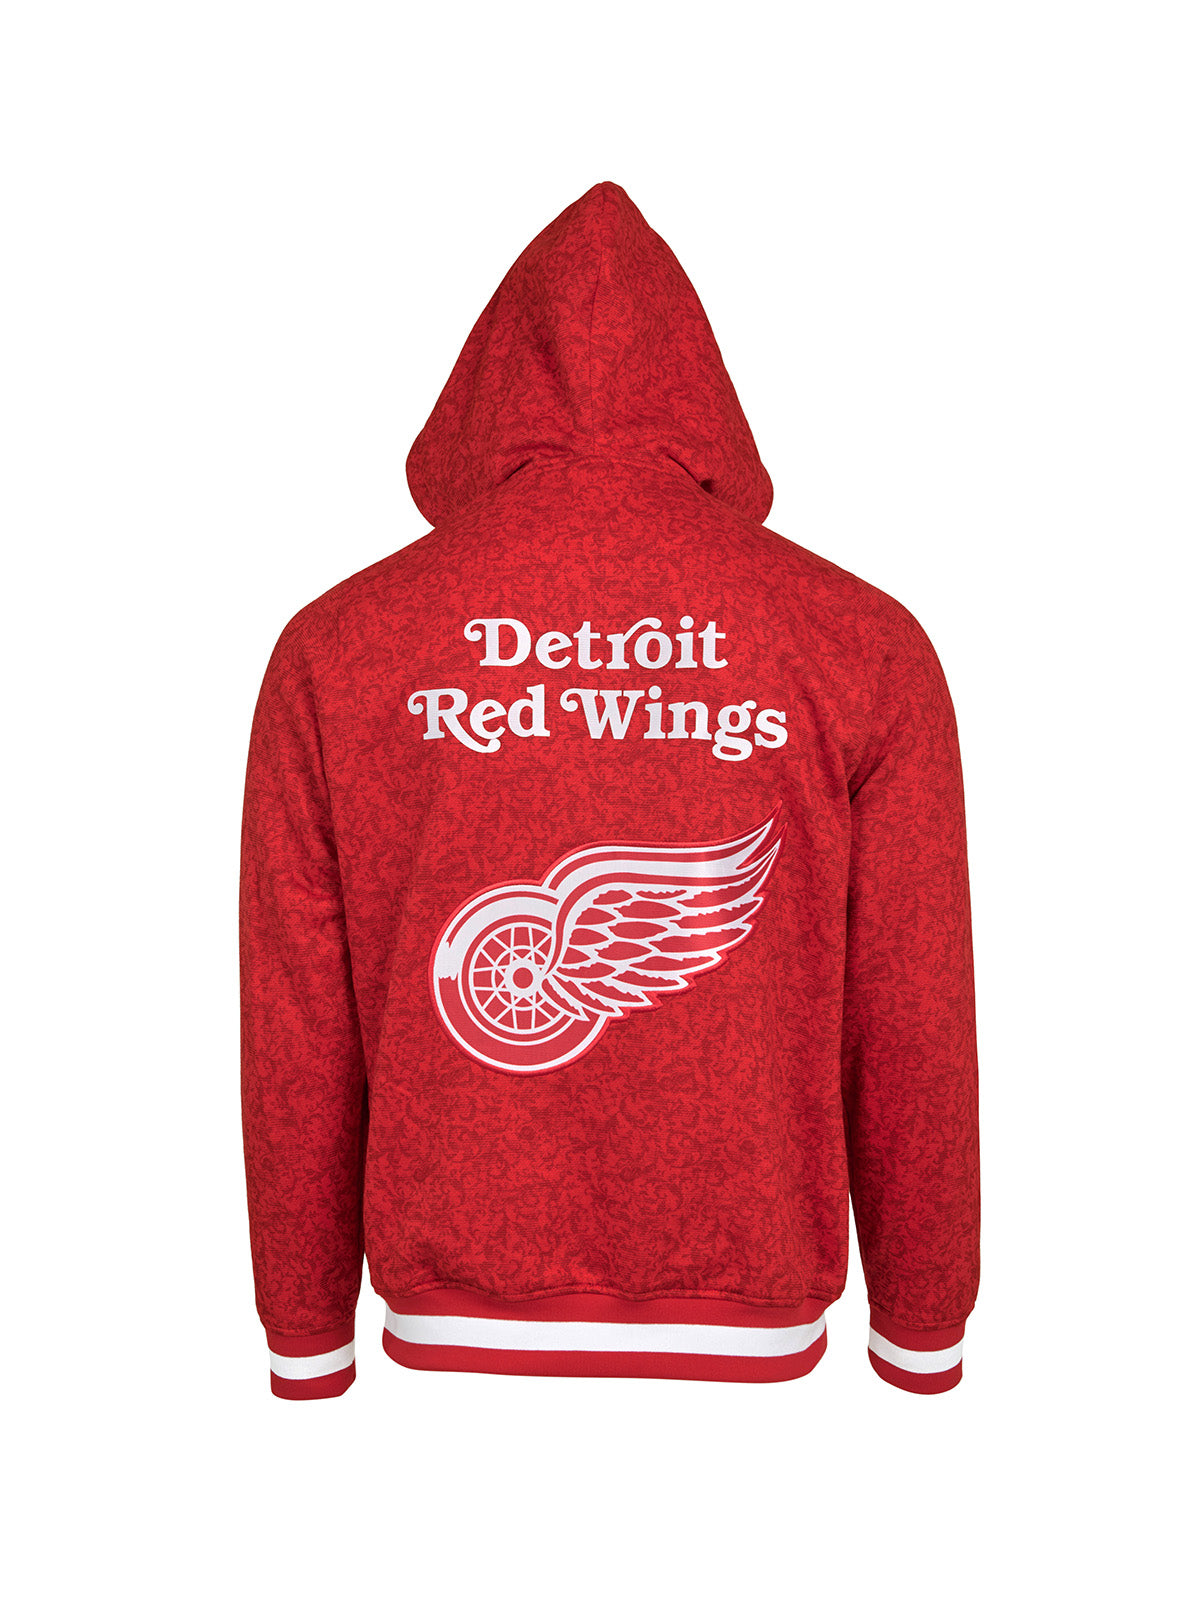 Detroit Red Wings Hoodie - Show your team spirit, with the iconic team logo patch centered on the back, and proudly display your Detroit Red Wings support in their team colors with this NHL hockey hoodie.